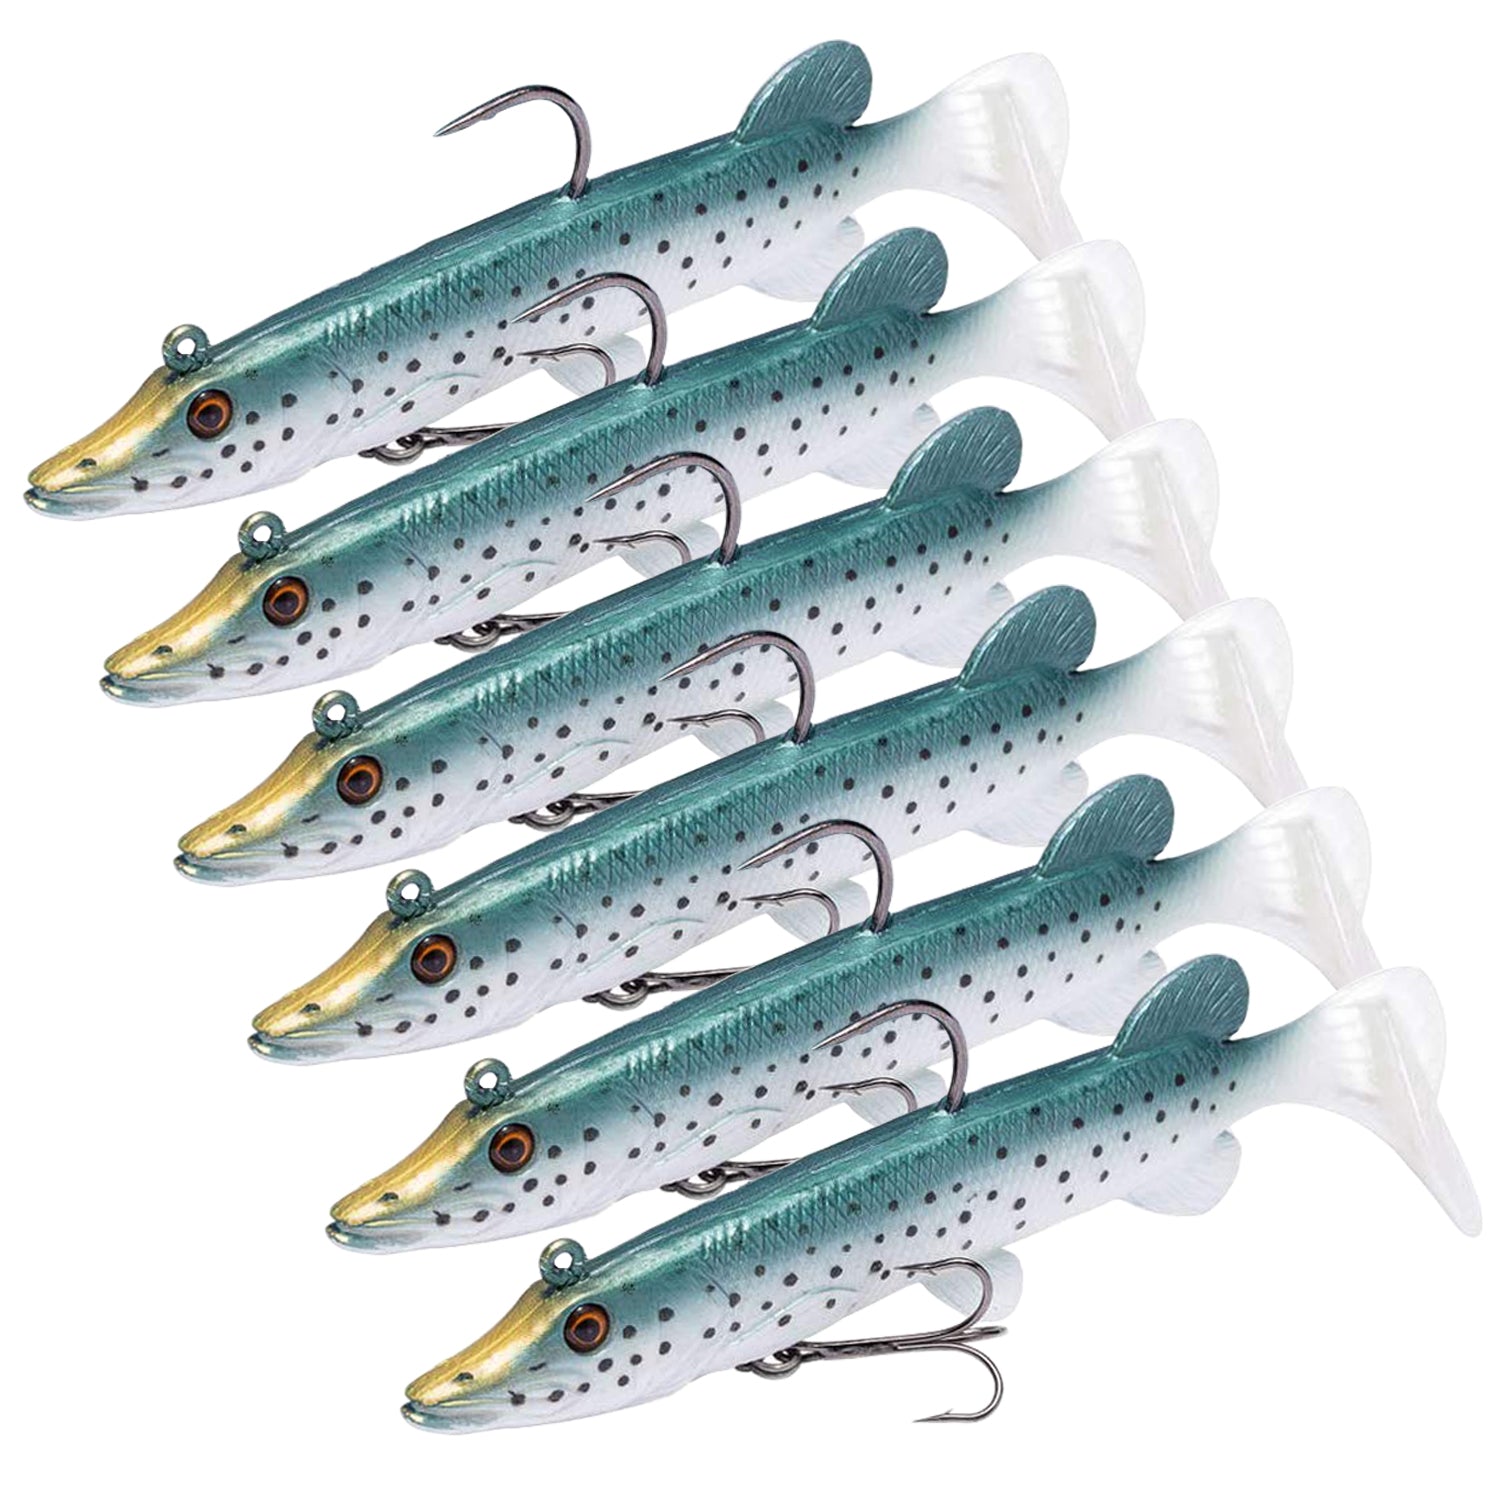 True Pike Soft Swimbait Fishing Lure, Built-In Lead Weight Pack, Pack of 6  - Green Gold / 10.5CM